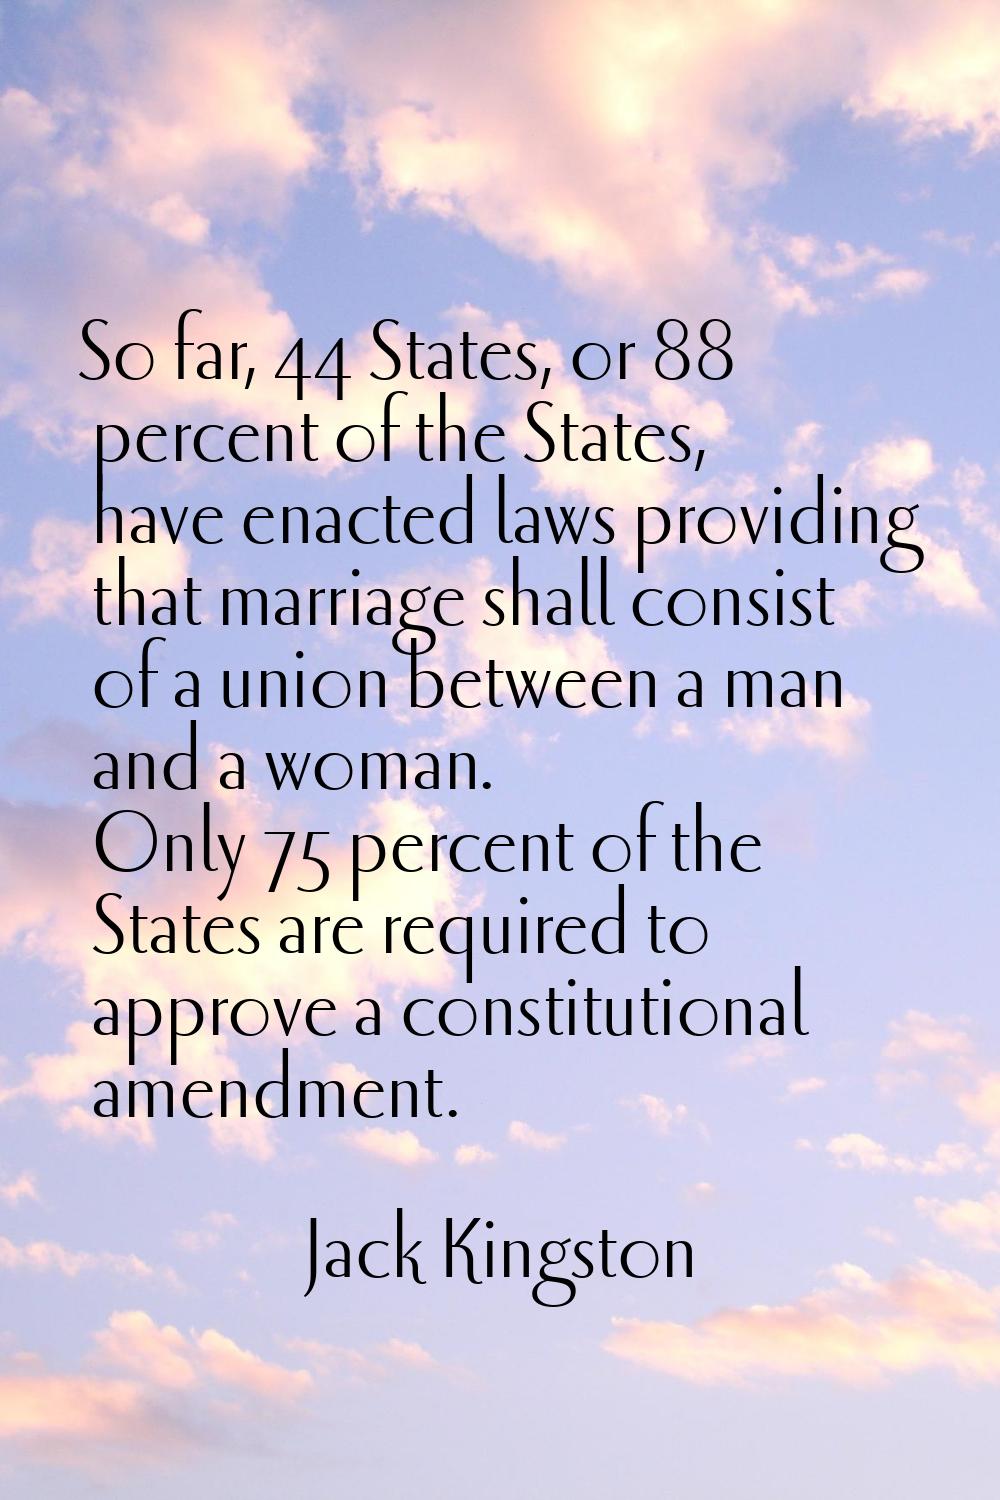 So far, 44 States, or 88 percent of the States, have enacted laws providing that marriage shall con